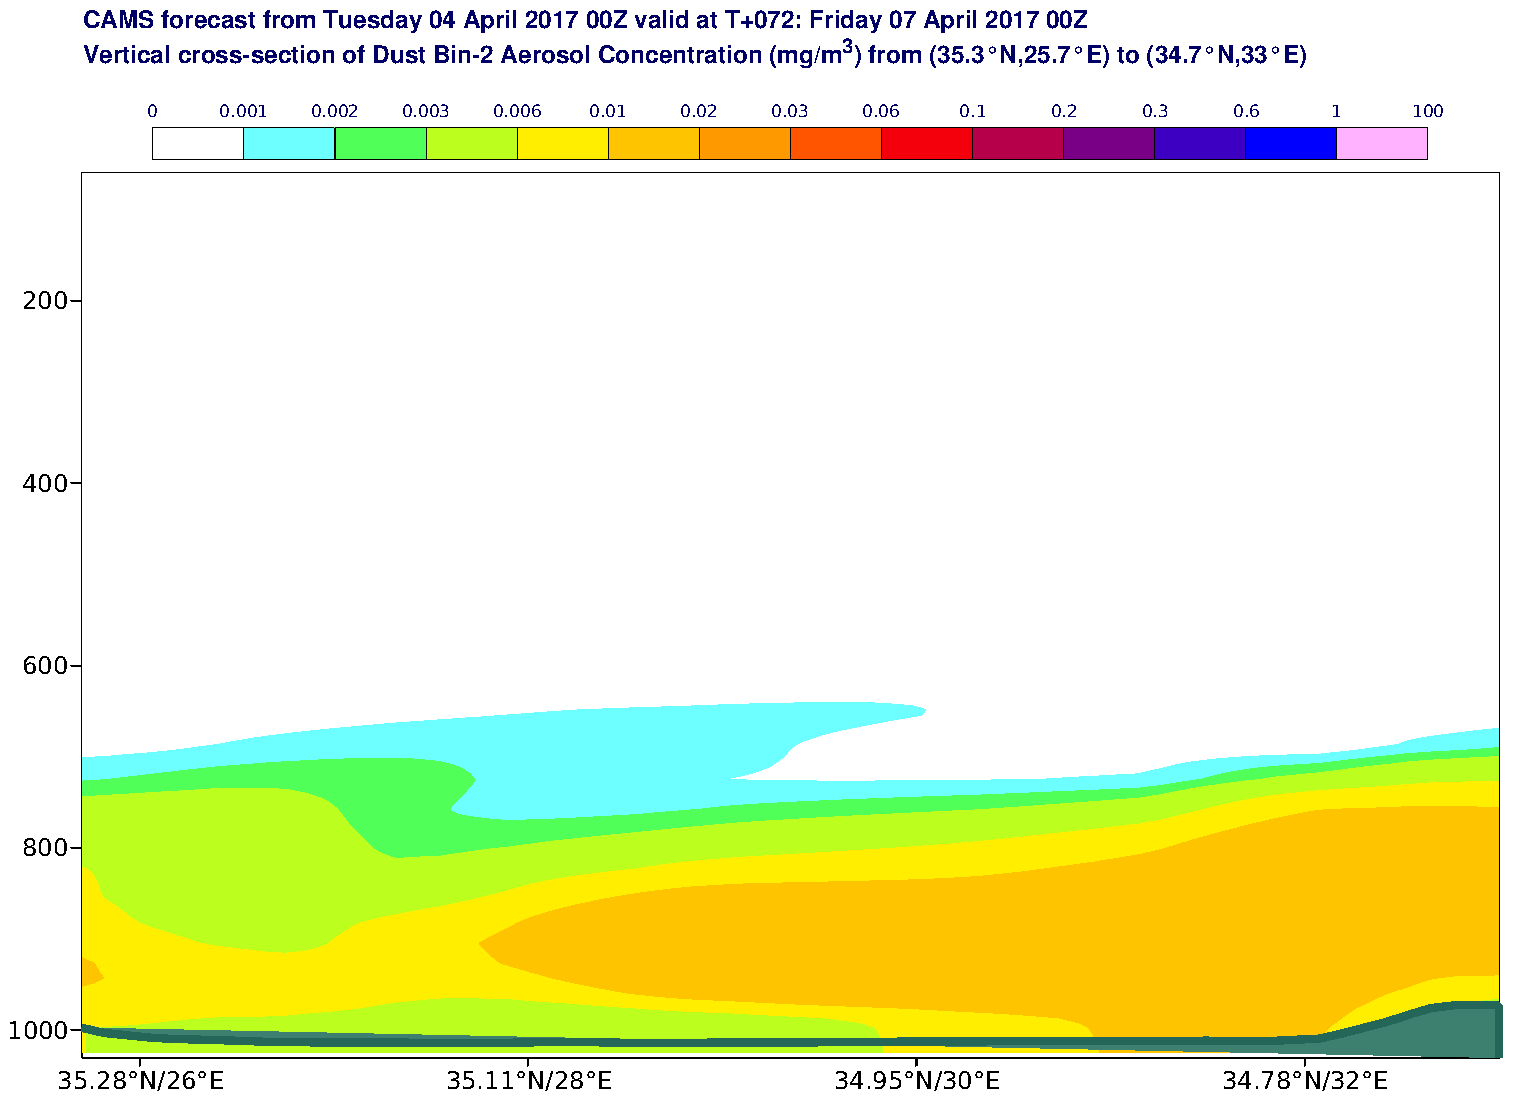 Vertical cross-section of Dust Bin-2 Aerosol Concentration (mg/m3) valid at T72 - 2017-04-07 00:00